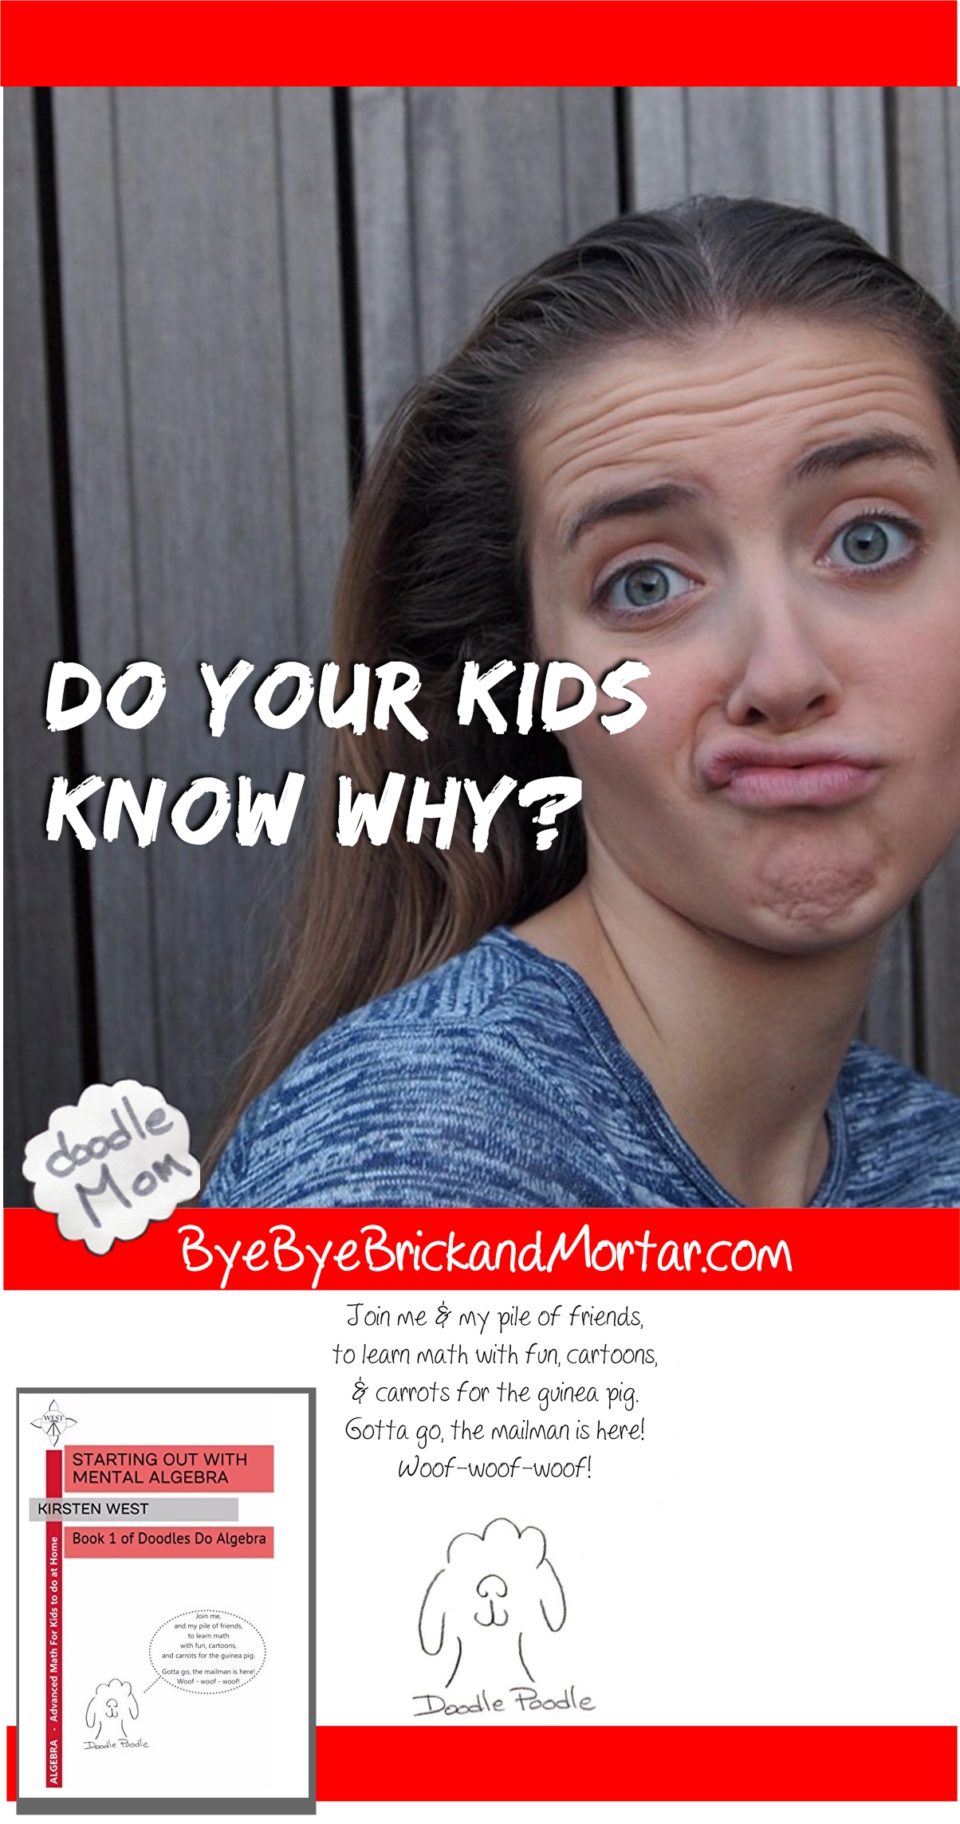 Do Your Kids Know Why?